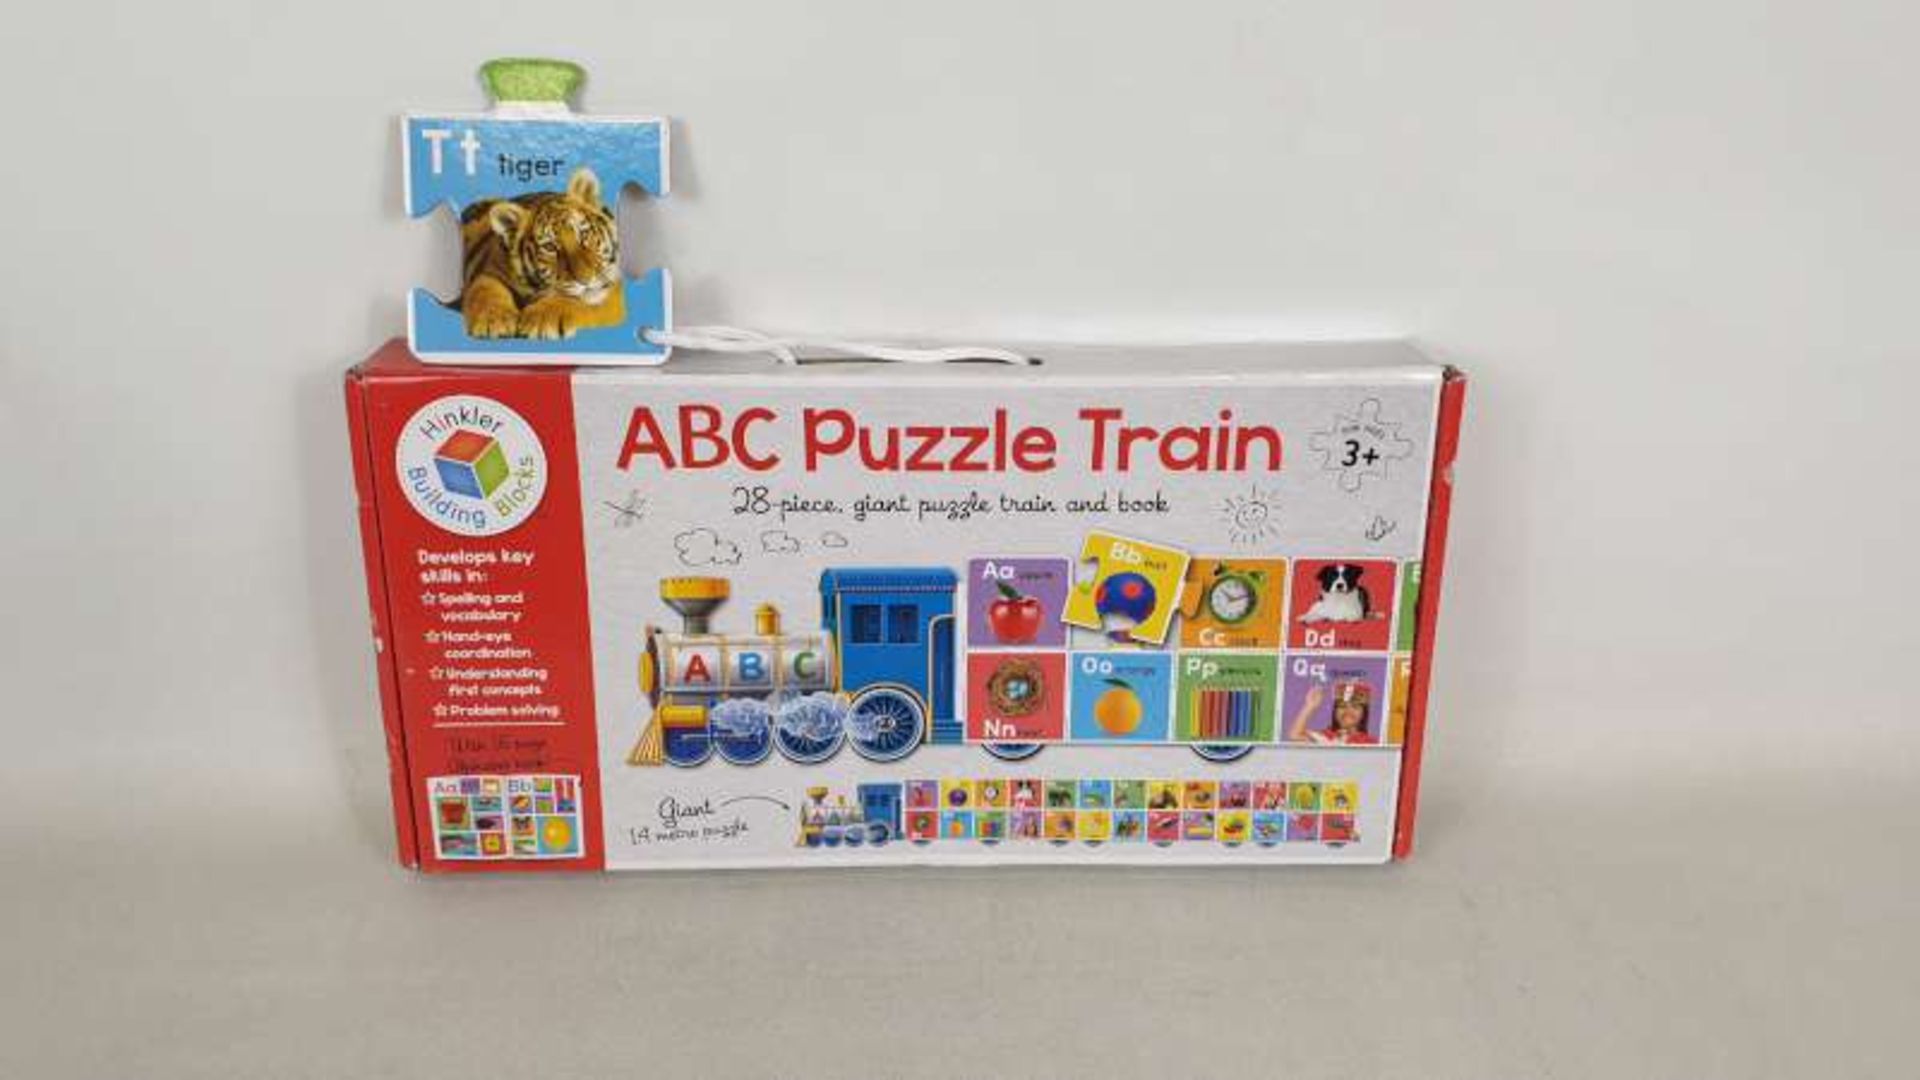 65 X ABC PUZZLE TRAIN 28 PIECE GIANT PUZZLE TRAIN AND BOOK